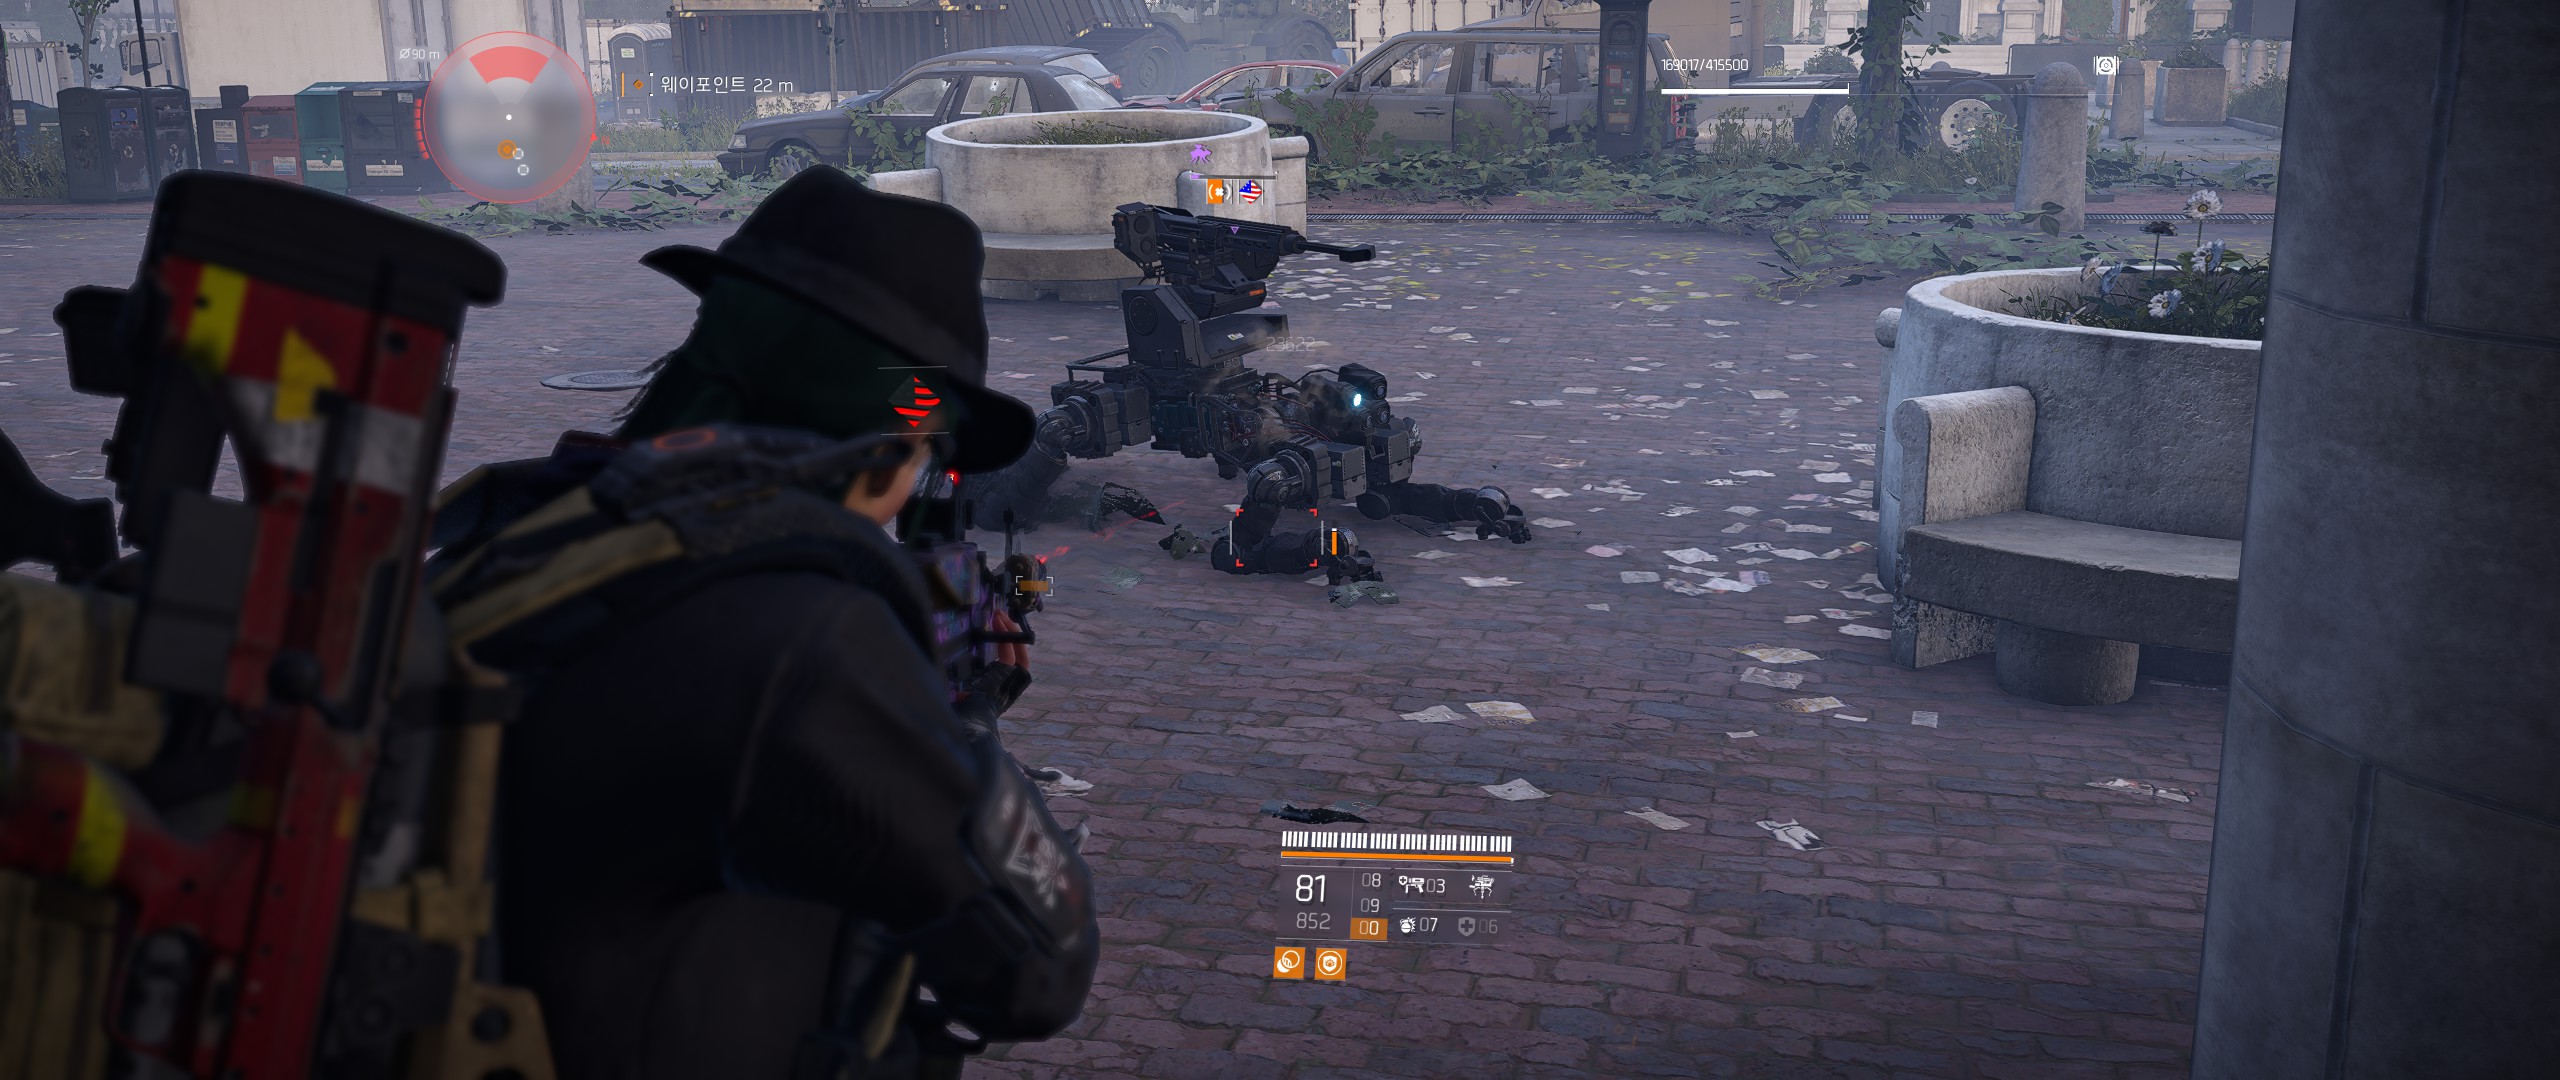 Tom Clancy's The Division® 22019-4-8-18-51-45.jpg